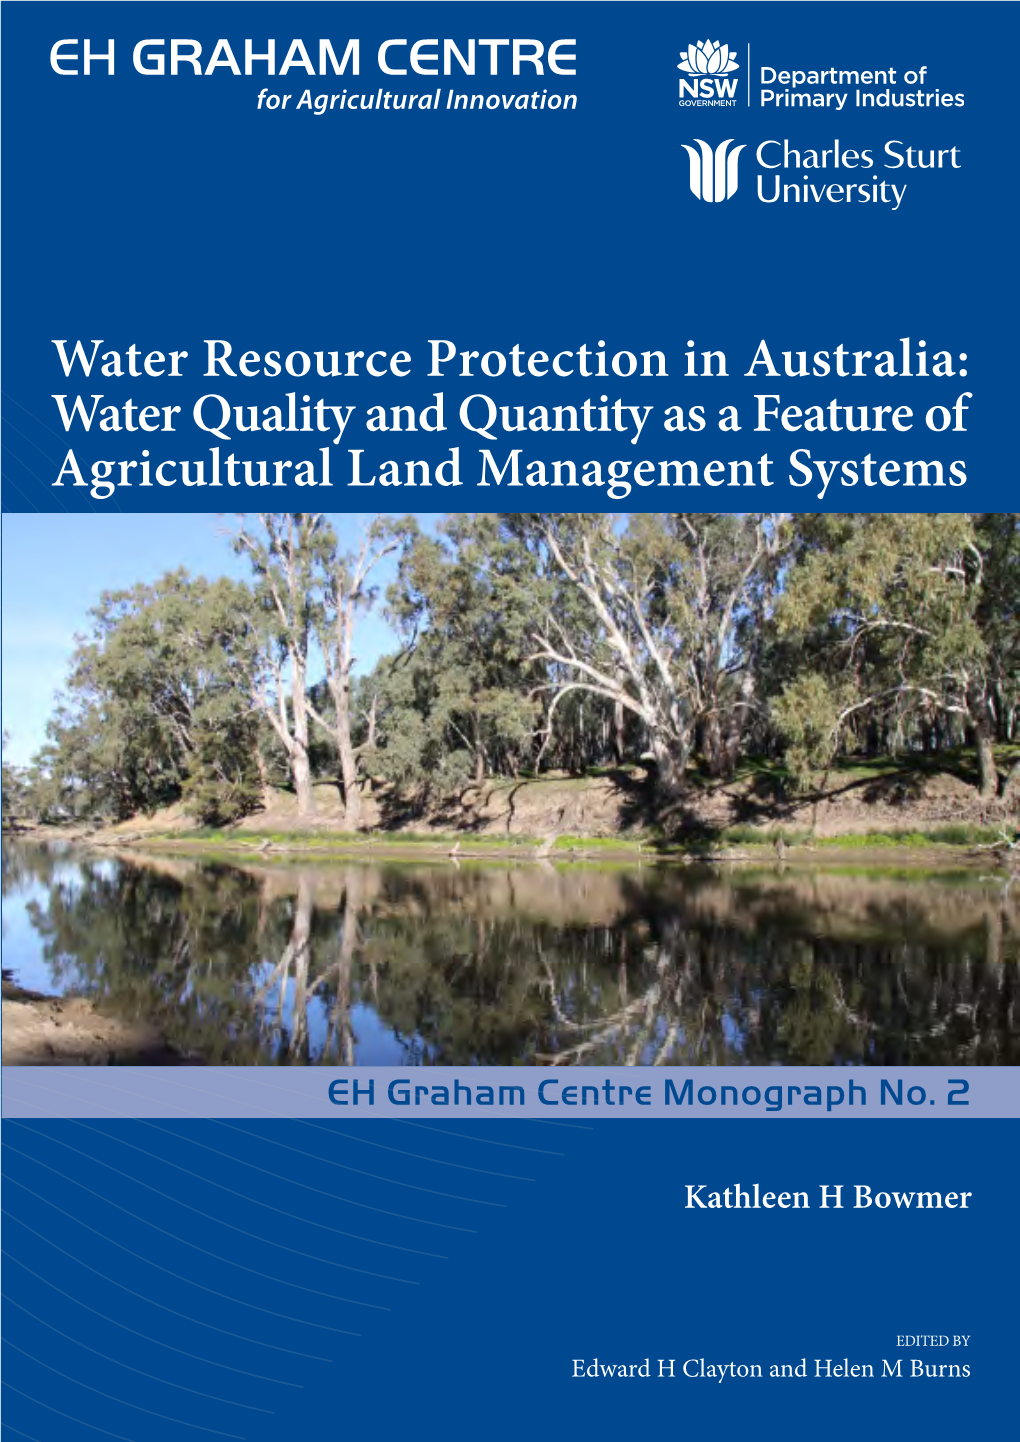 Water Resource Protection in Australia: Water Quality and Quantity As a Feature of Agricultural Land Management Systems